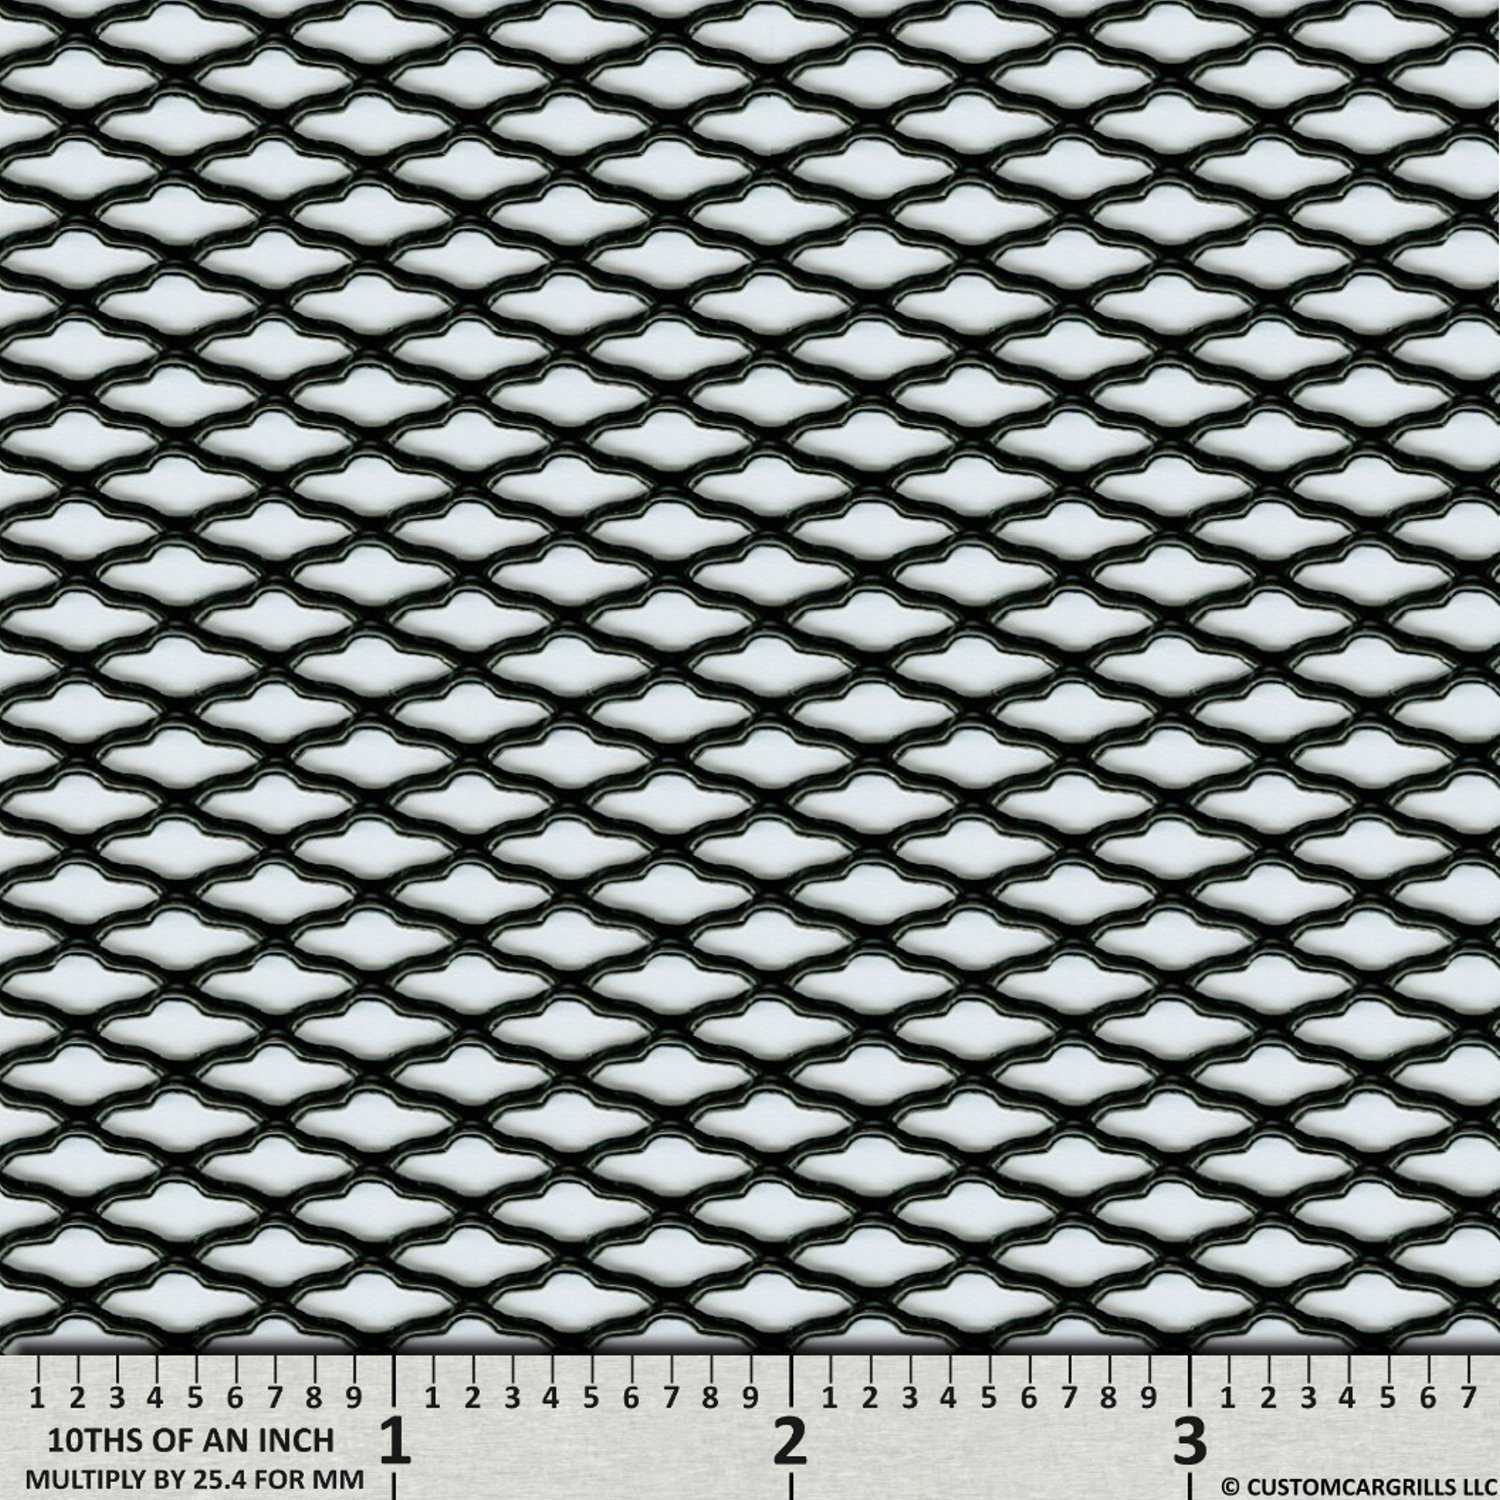 6in. x 36in. Oval ZigZag Grill Mesh Sheet - Gloss Black